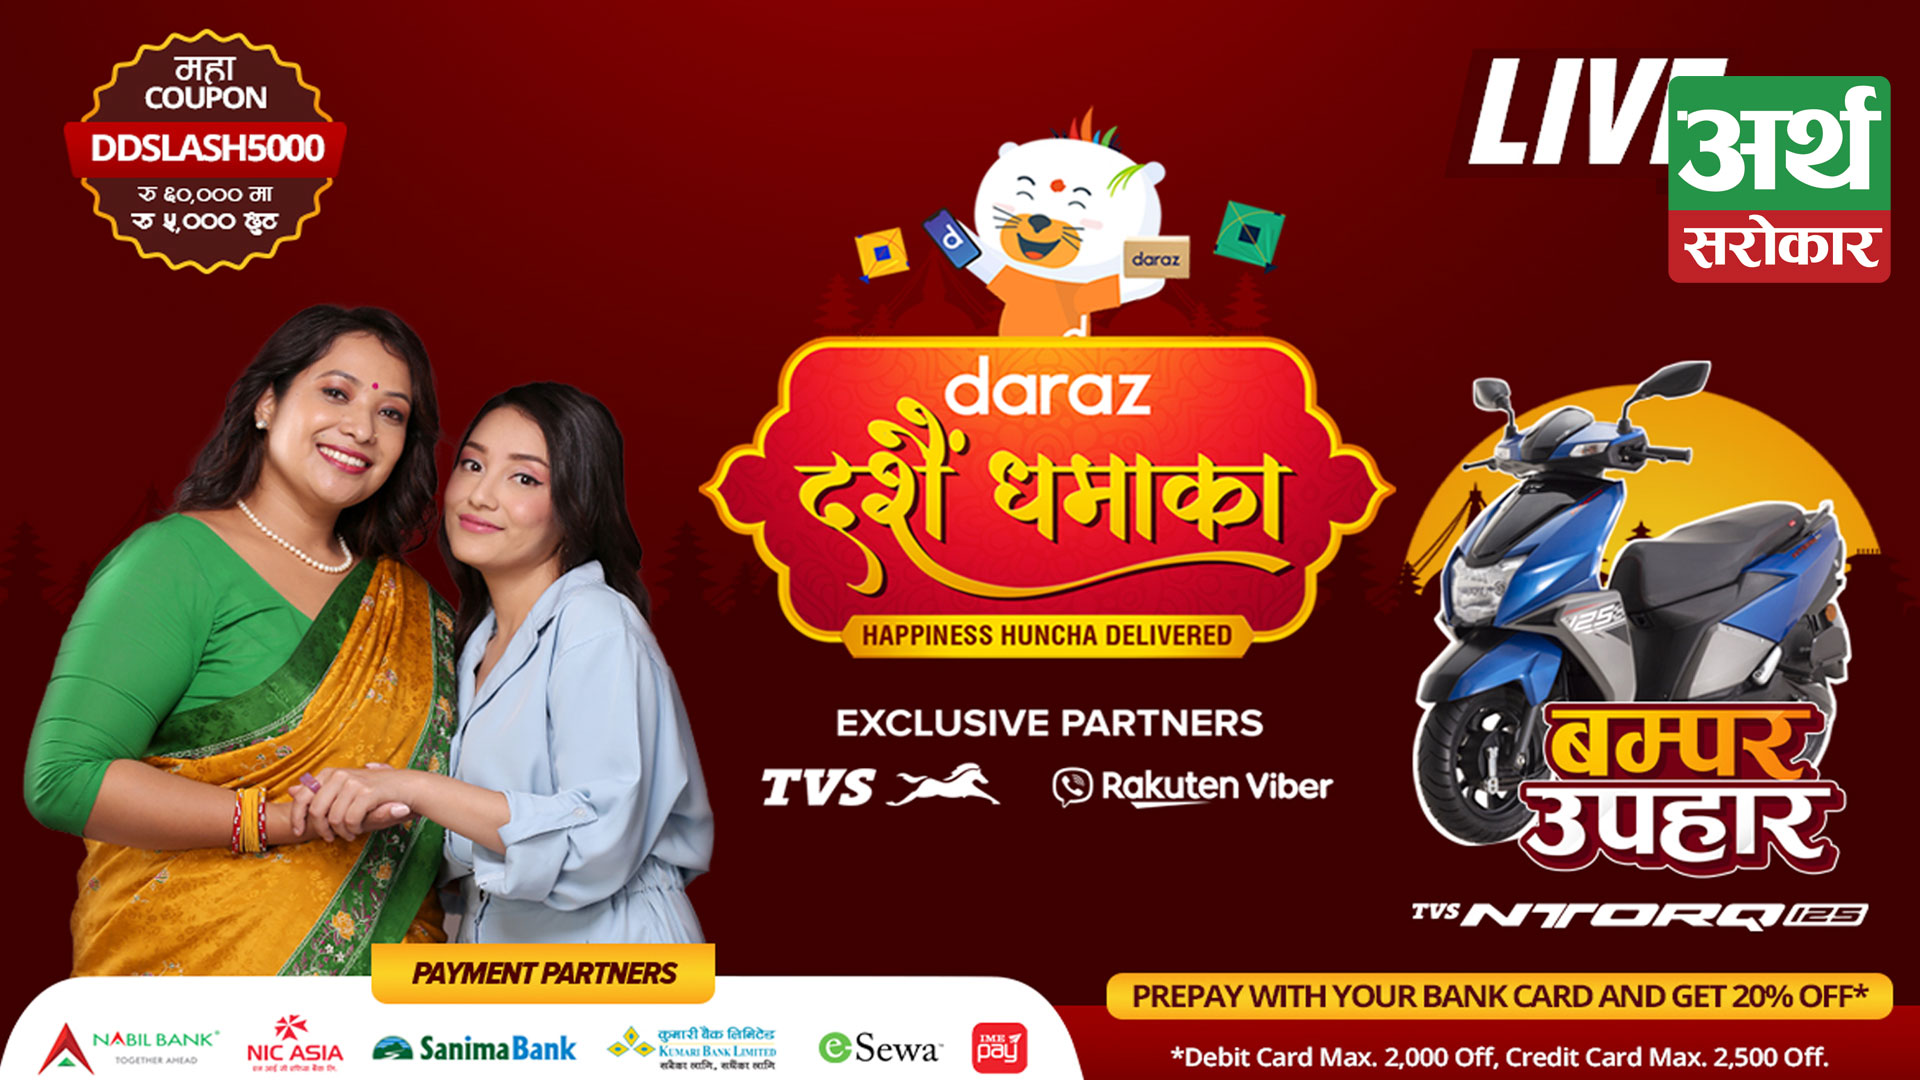 Daraz set to kick off the festive season with Dashain Dhamaka-Exclusive Deals, Discounts, Free Shipping & More